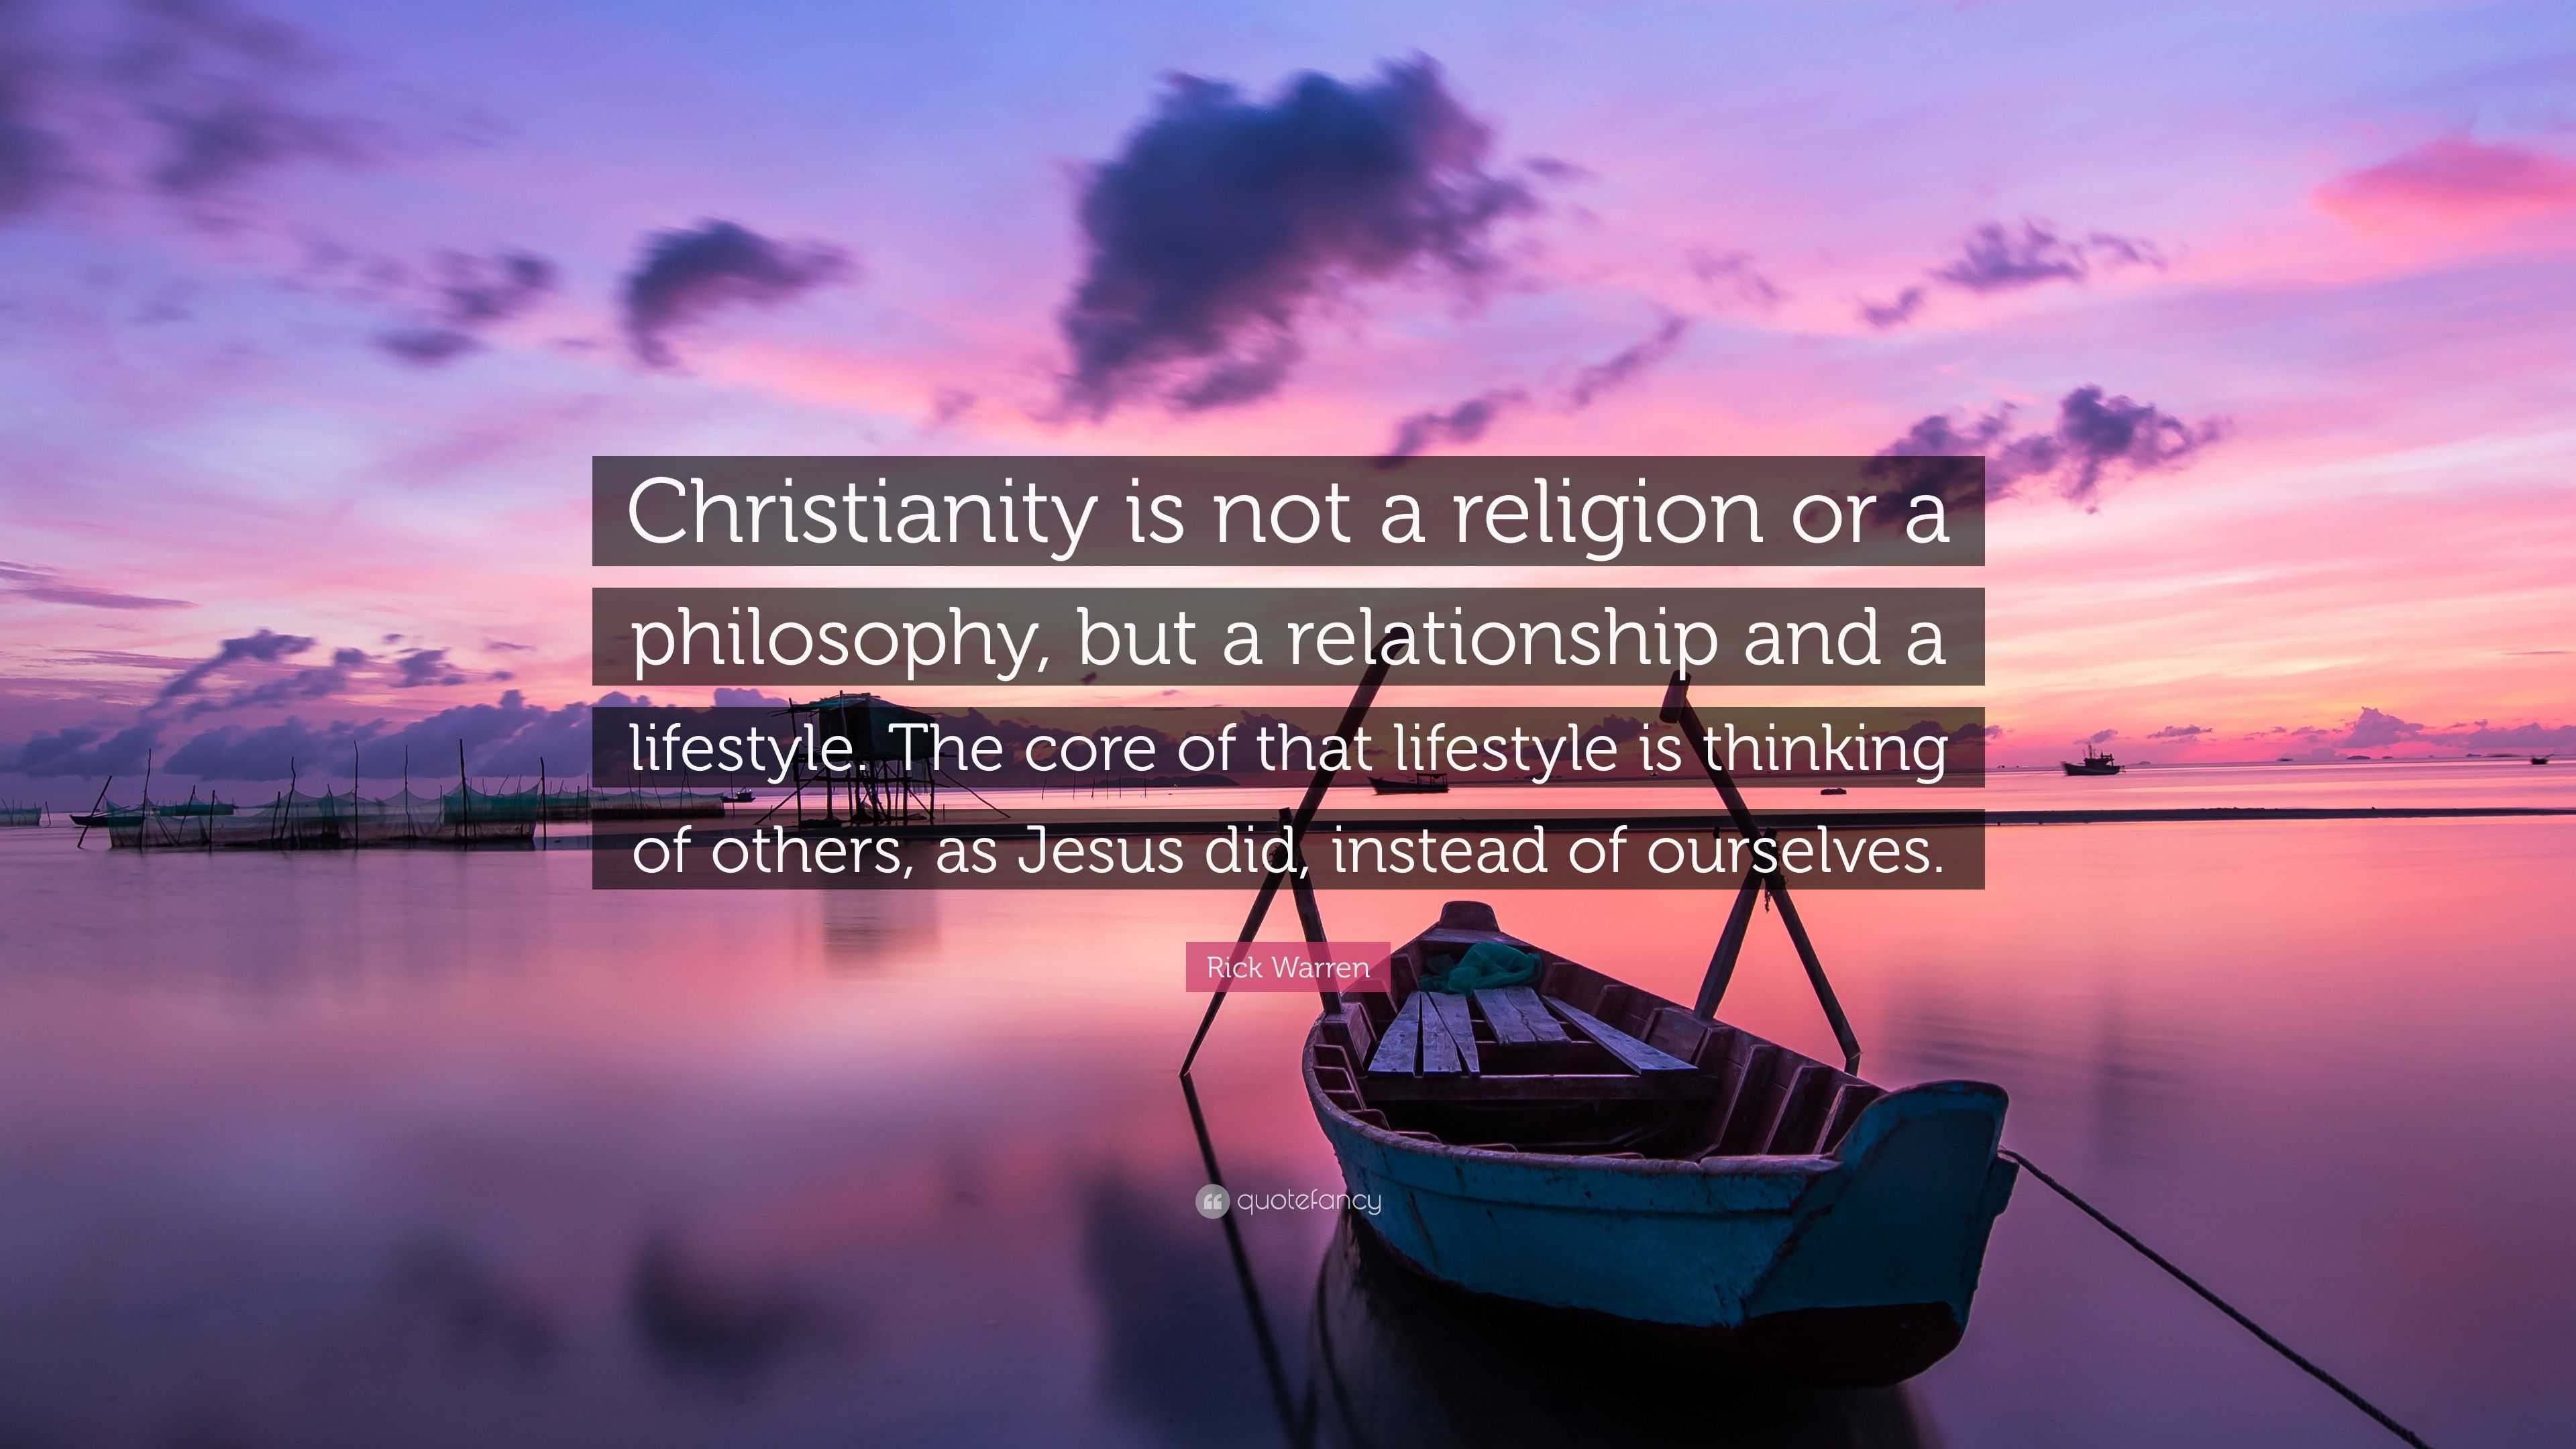 Rick Warren Quote: “Christianity is not a religion or a philosophy, but